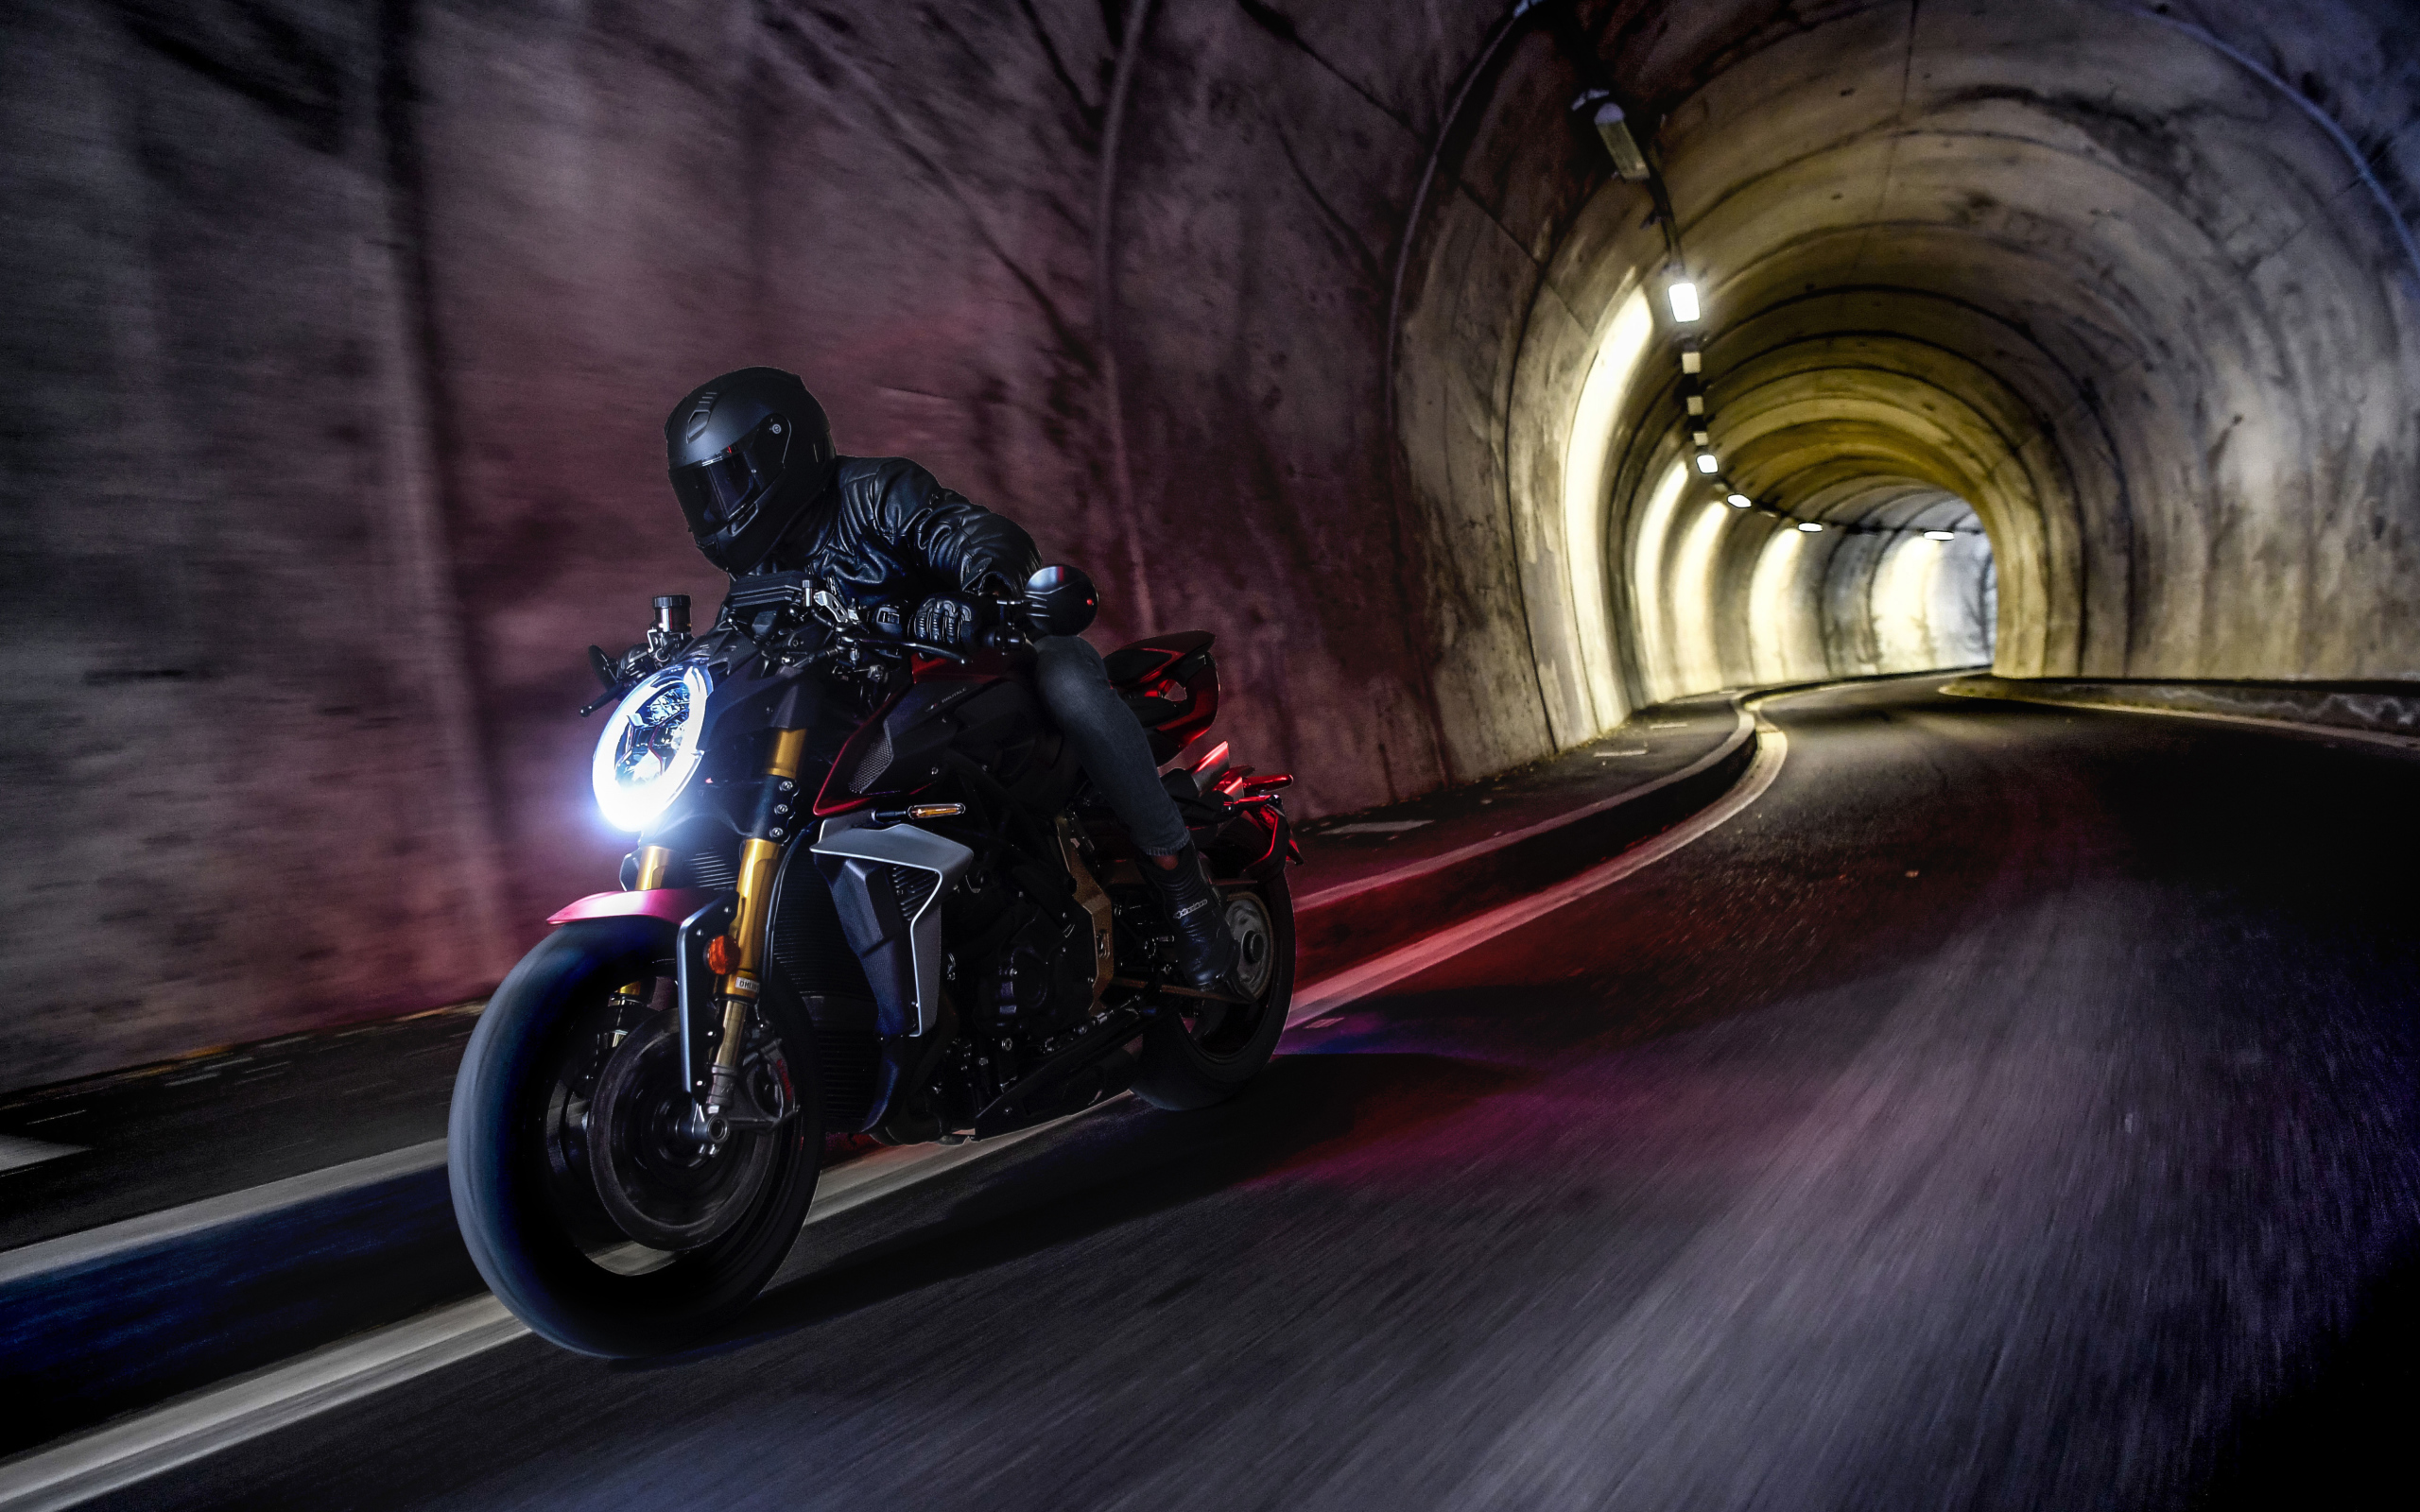 Motorcyclist on a motorcycle MV Agusta Brutale 1000 Serie Oro 2019 in the tunnel